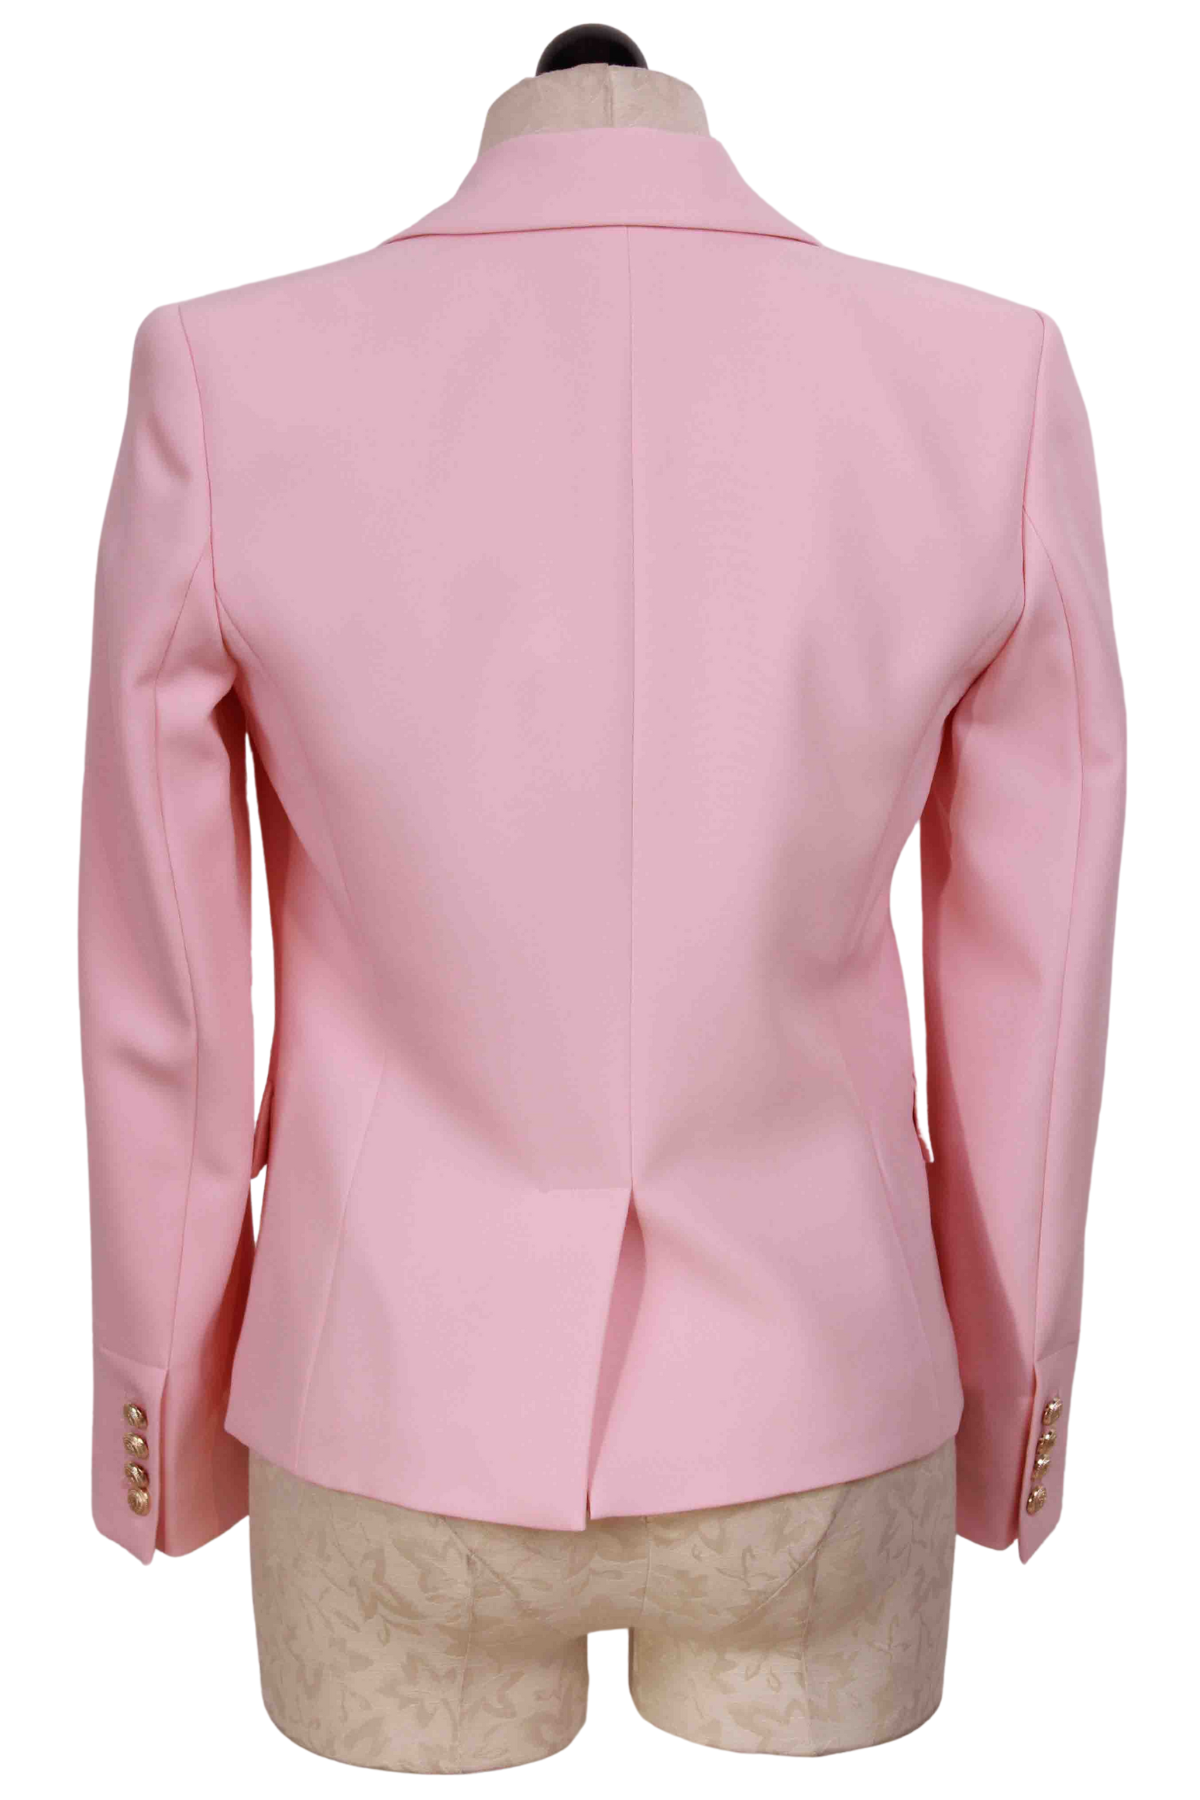 back view of Pastel Pink Delilah Crepe Blazer by Generation Love